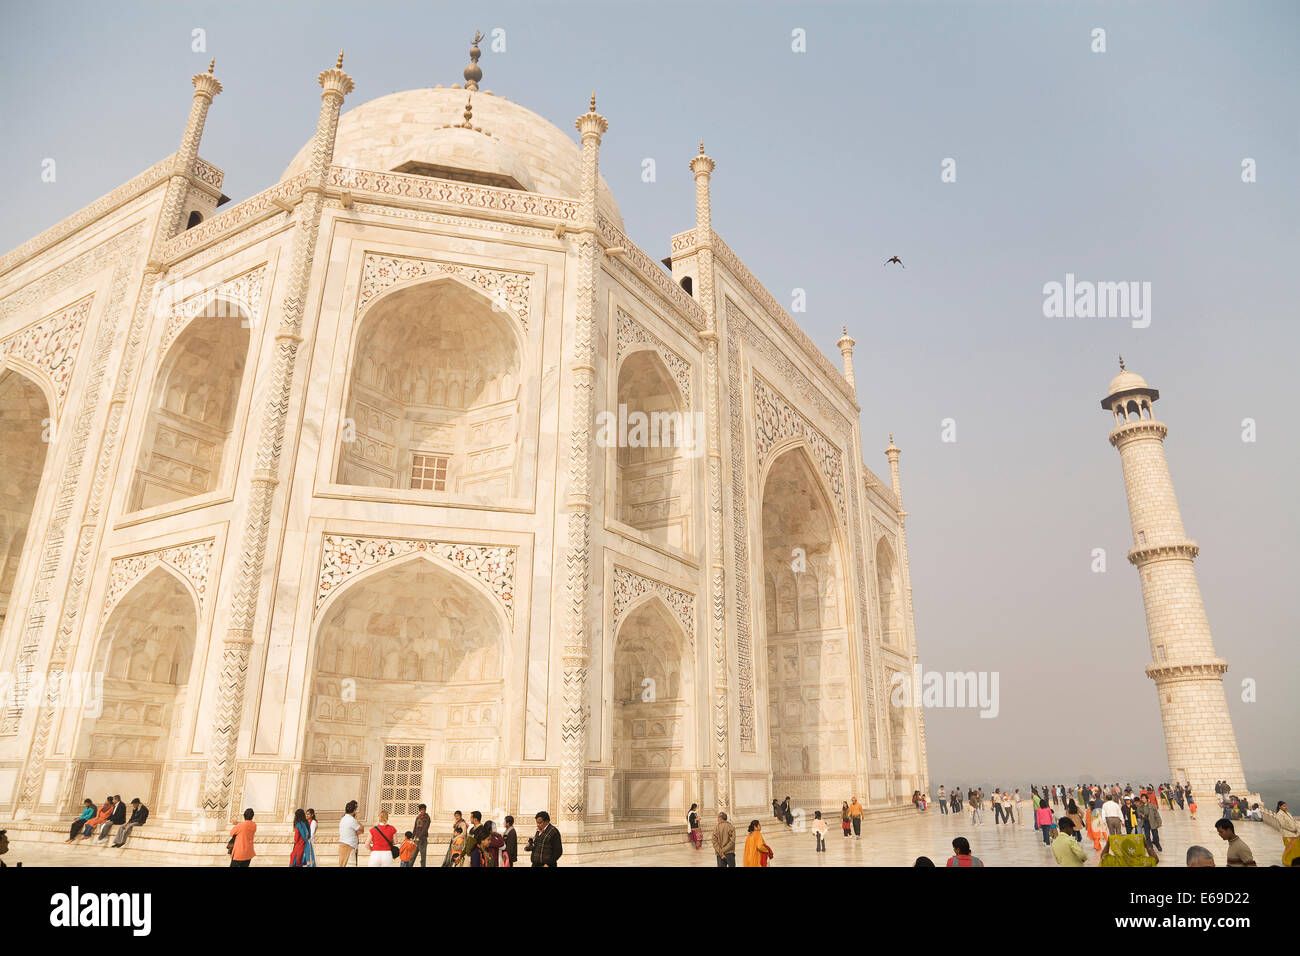 Ornate Shah Jahan mosque and tower, Agra, India Stock Photo